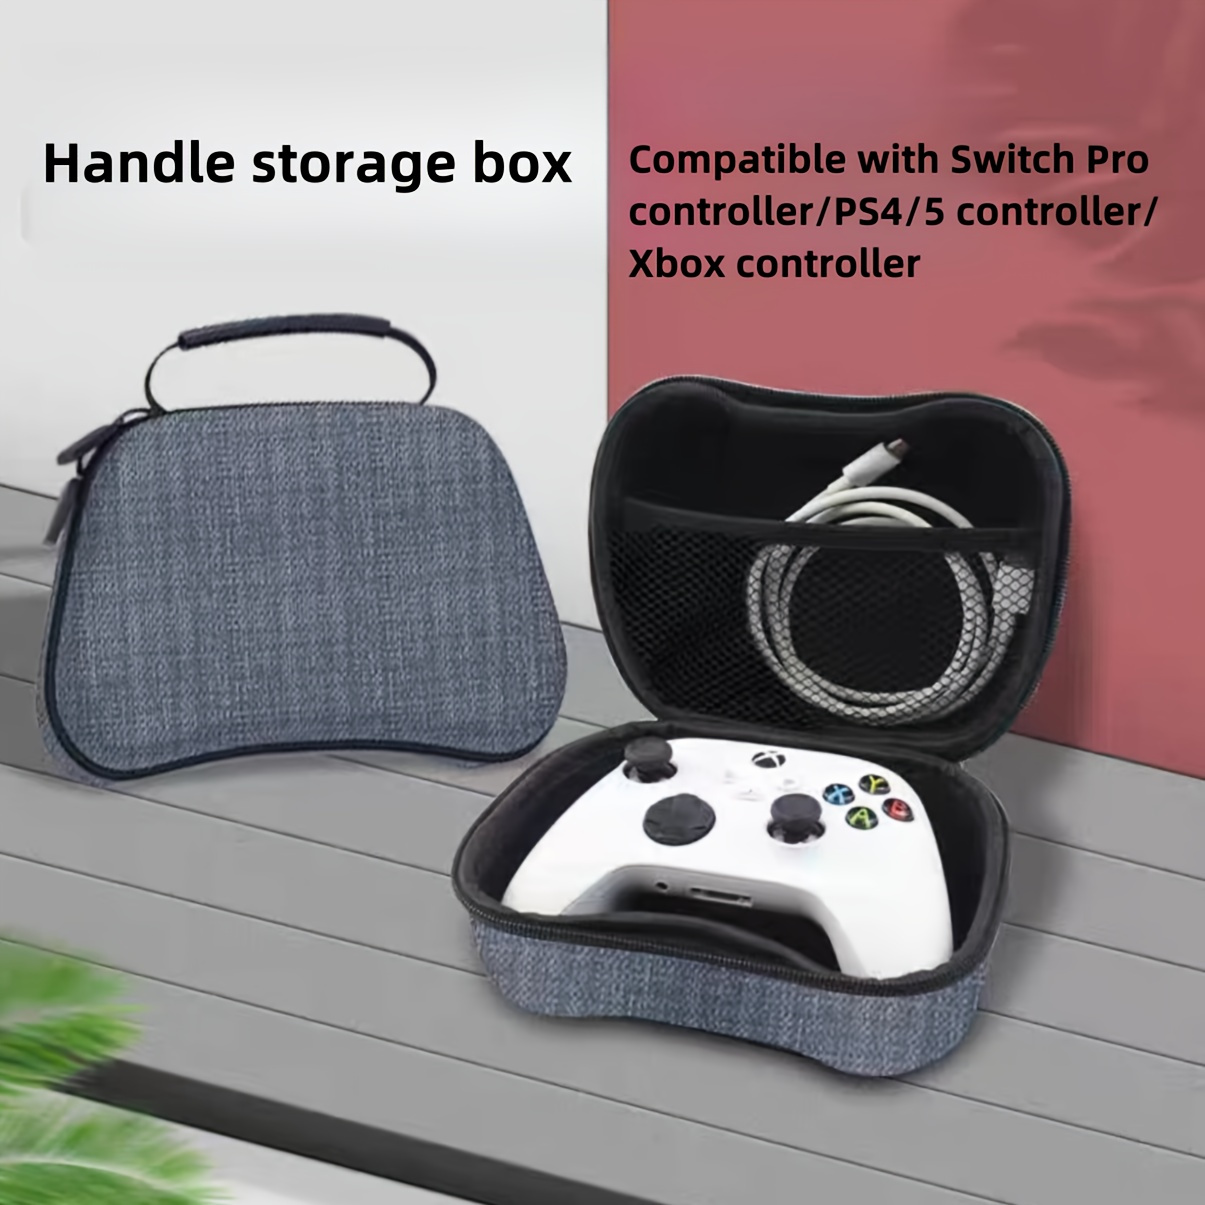 

Premium Controller Storage Case For Switch Pro, Ps4/5 & - Dual Zipper, Smooth Glide, Strong Alloy Pulls, Snug Fit With Velvet Interior & Secure Grid Compartments